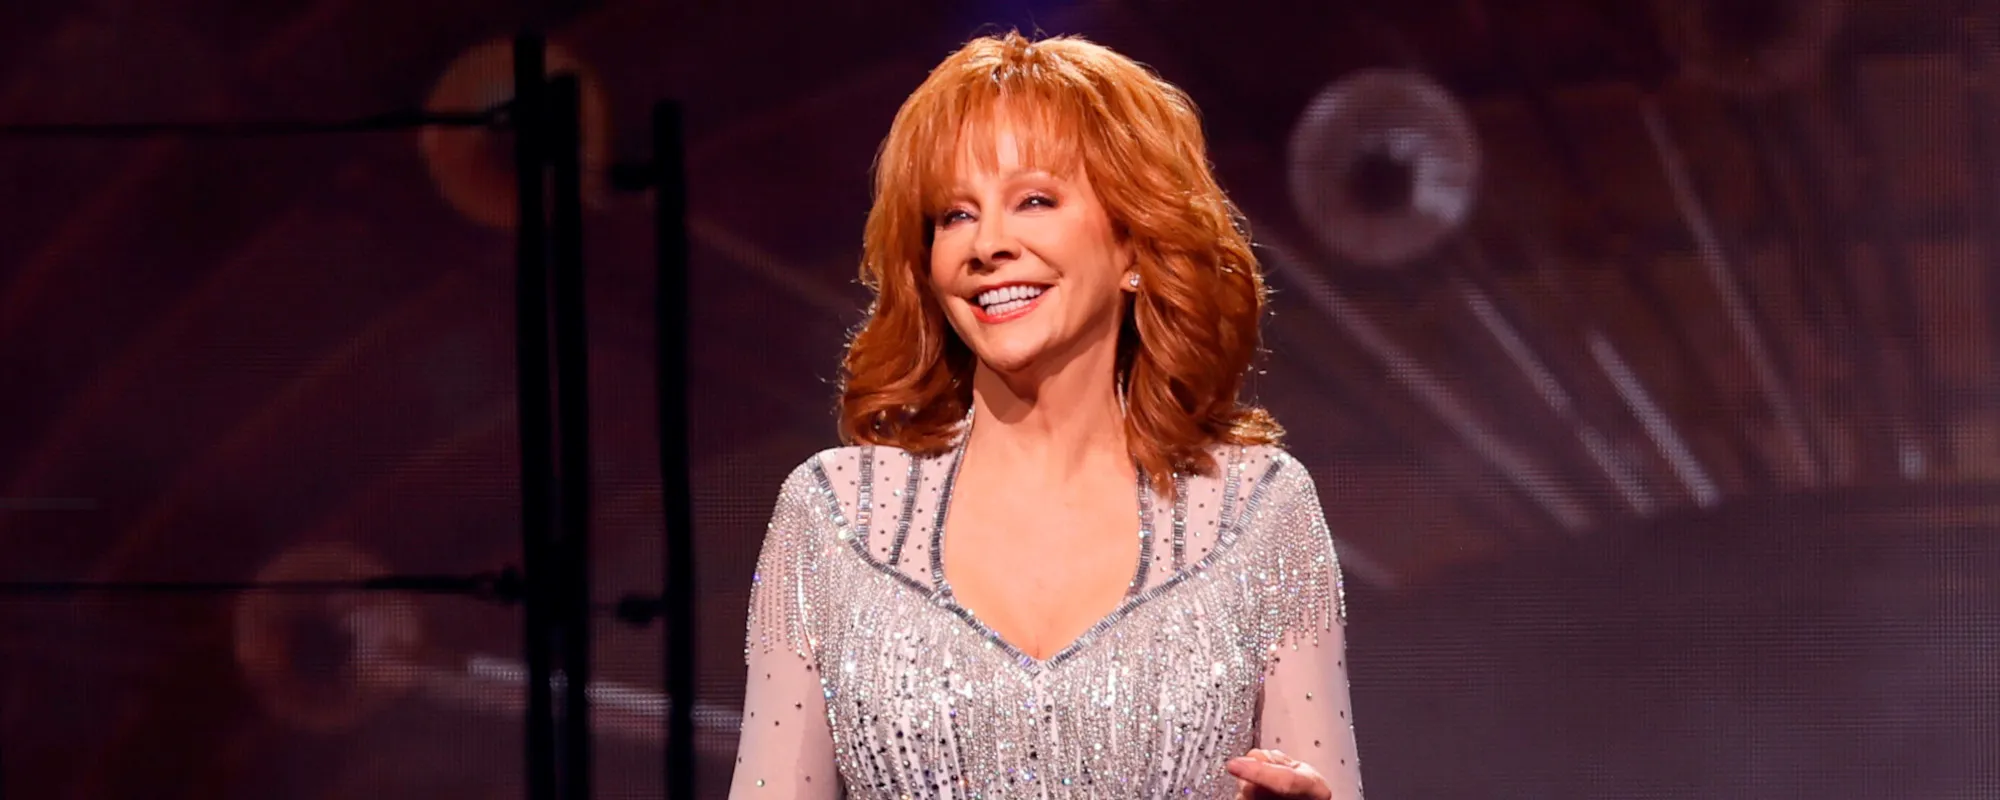 Streaming Tonight: Reba McEntire’s New Restaurant to Broadcast Grand Opening